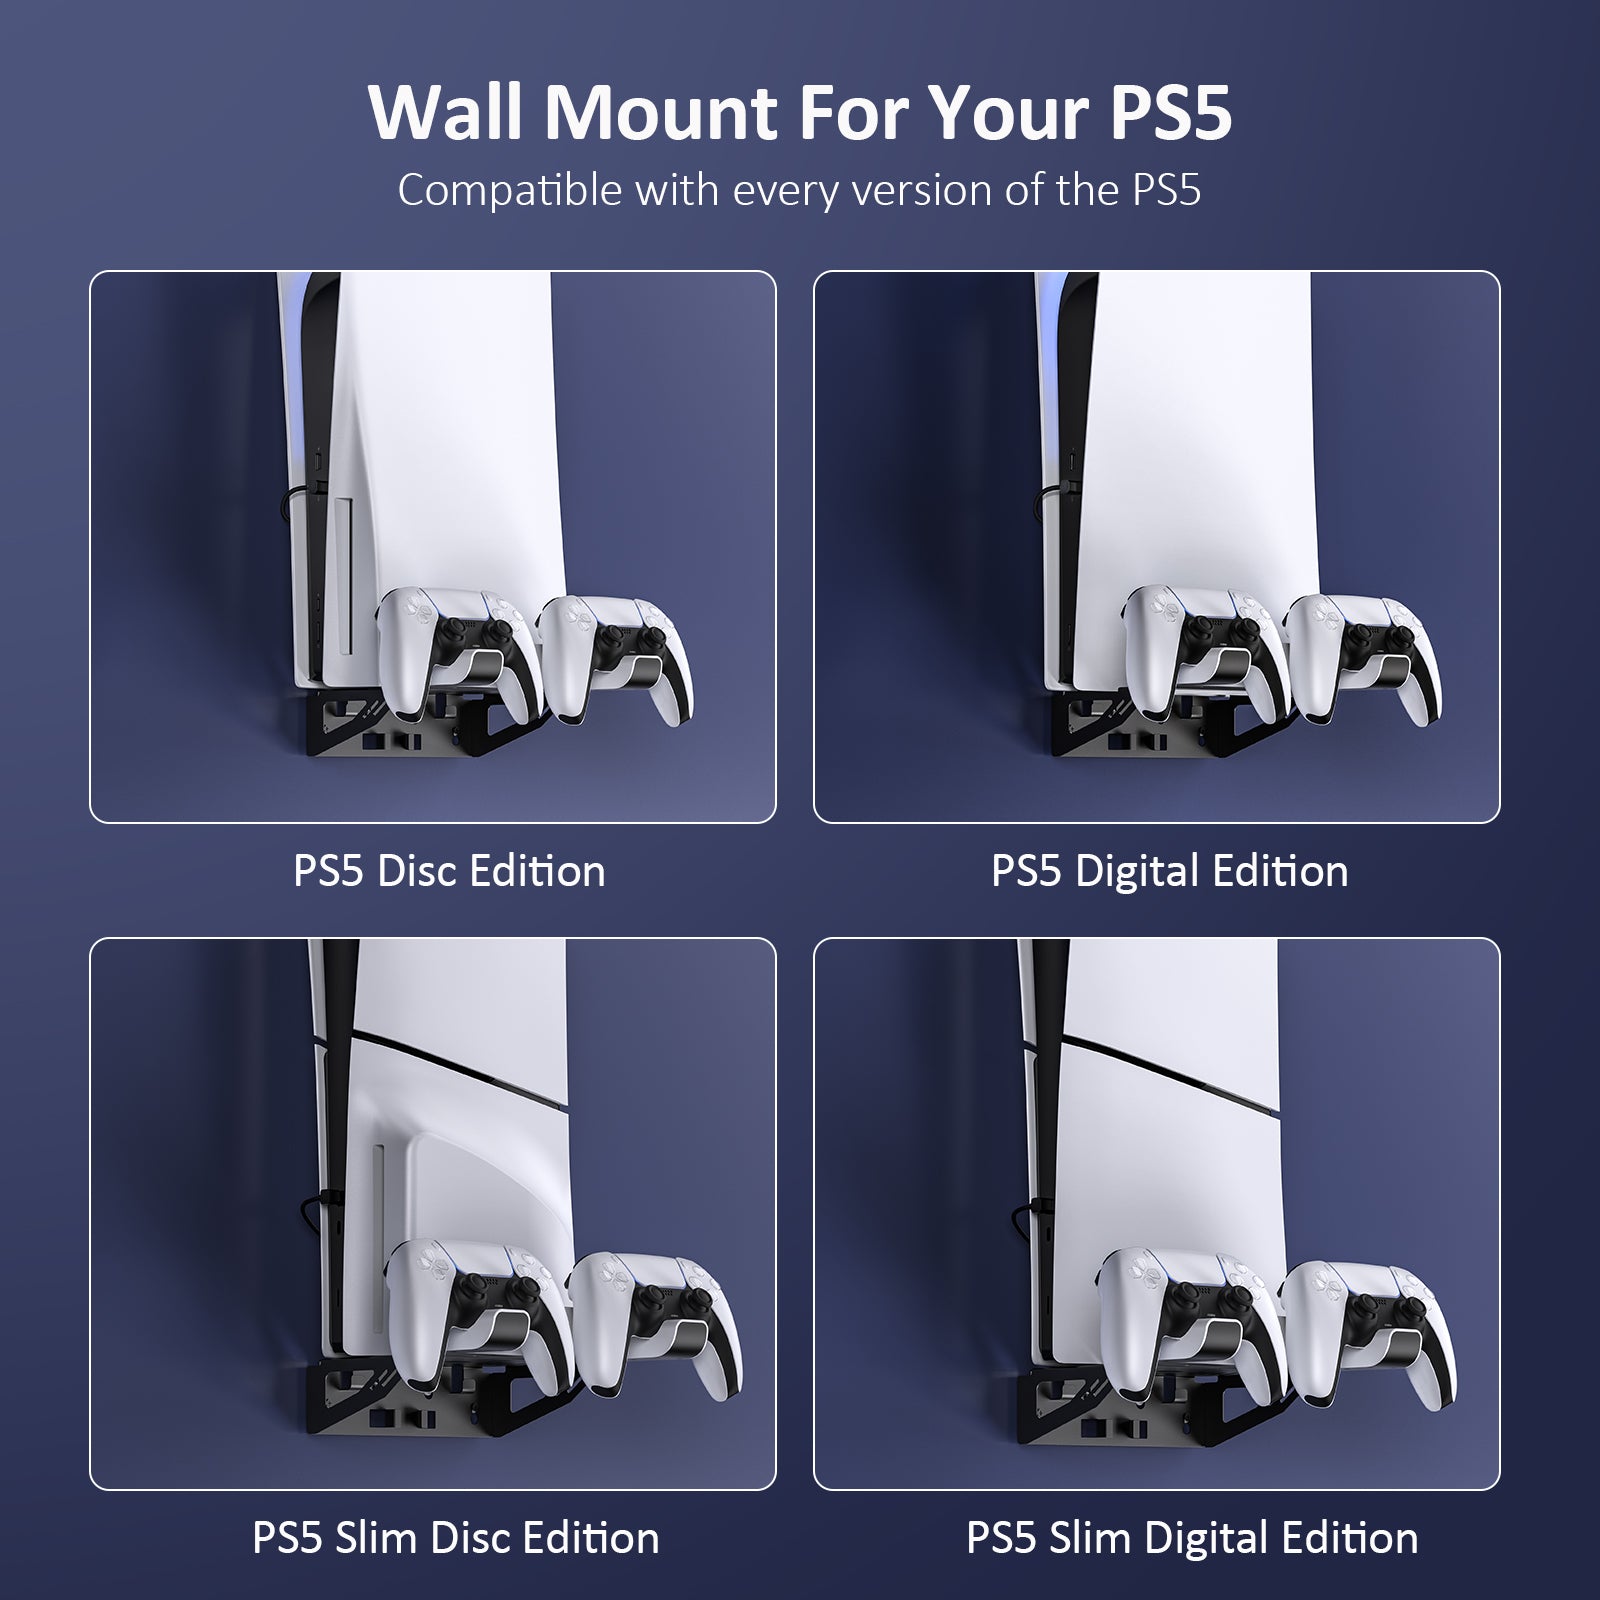 Compatible with 4 PS5 models: PS5 Disc Edition/PS5 Digital Edition/PS5 Slim Disc Edition/PS5 Slim Digital Edition.